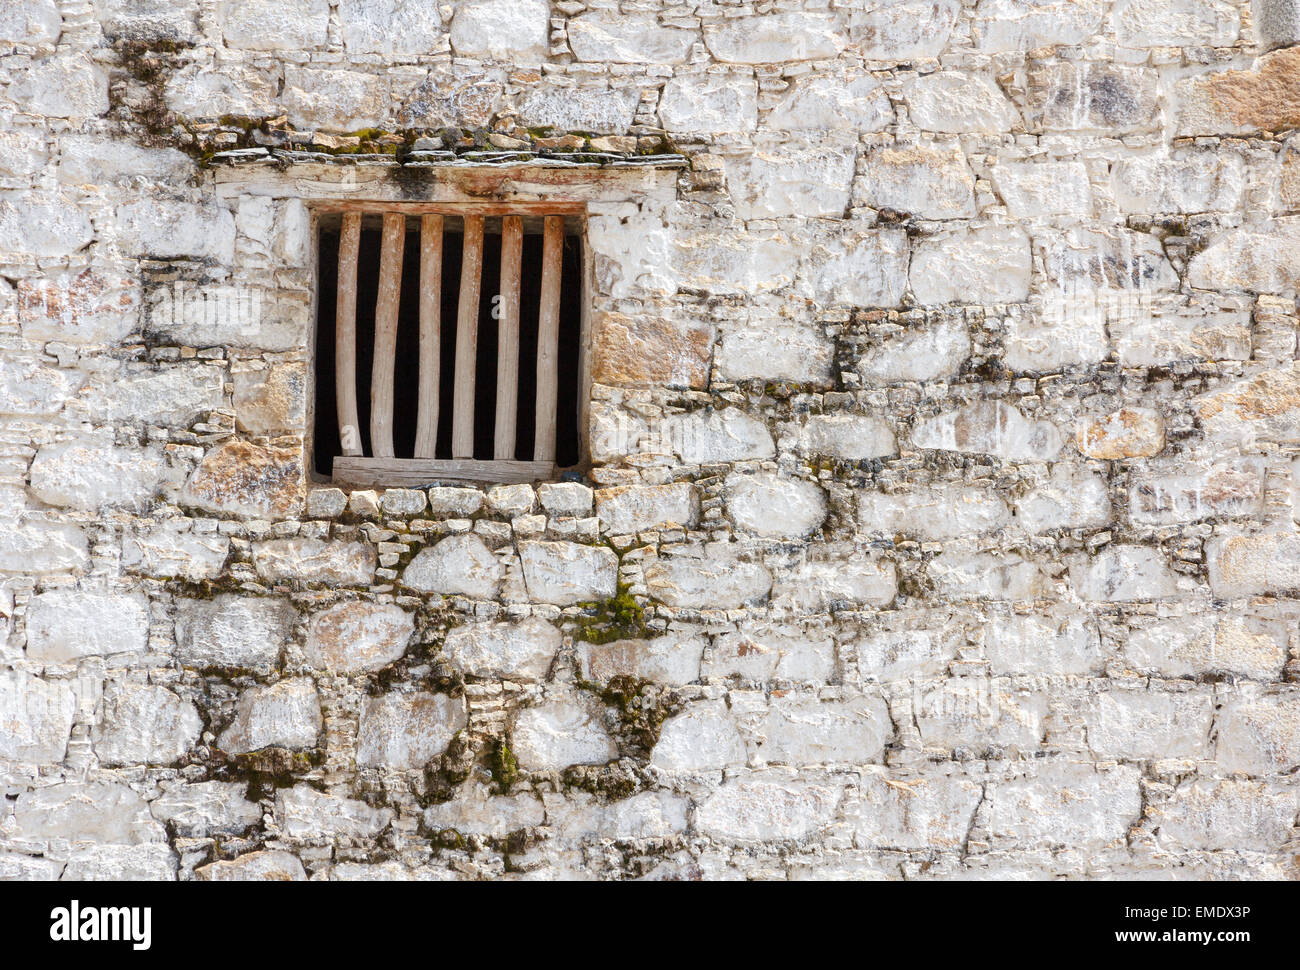 Old prison cell window with wooden bars in a white brick wall Stock Photo